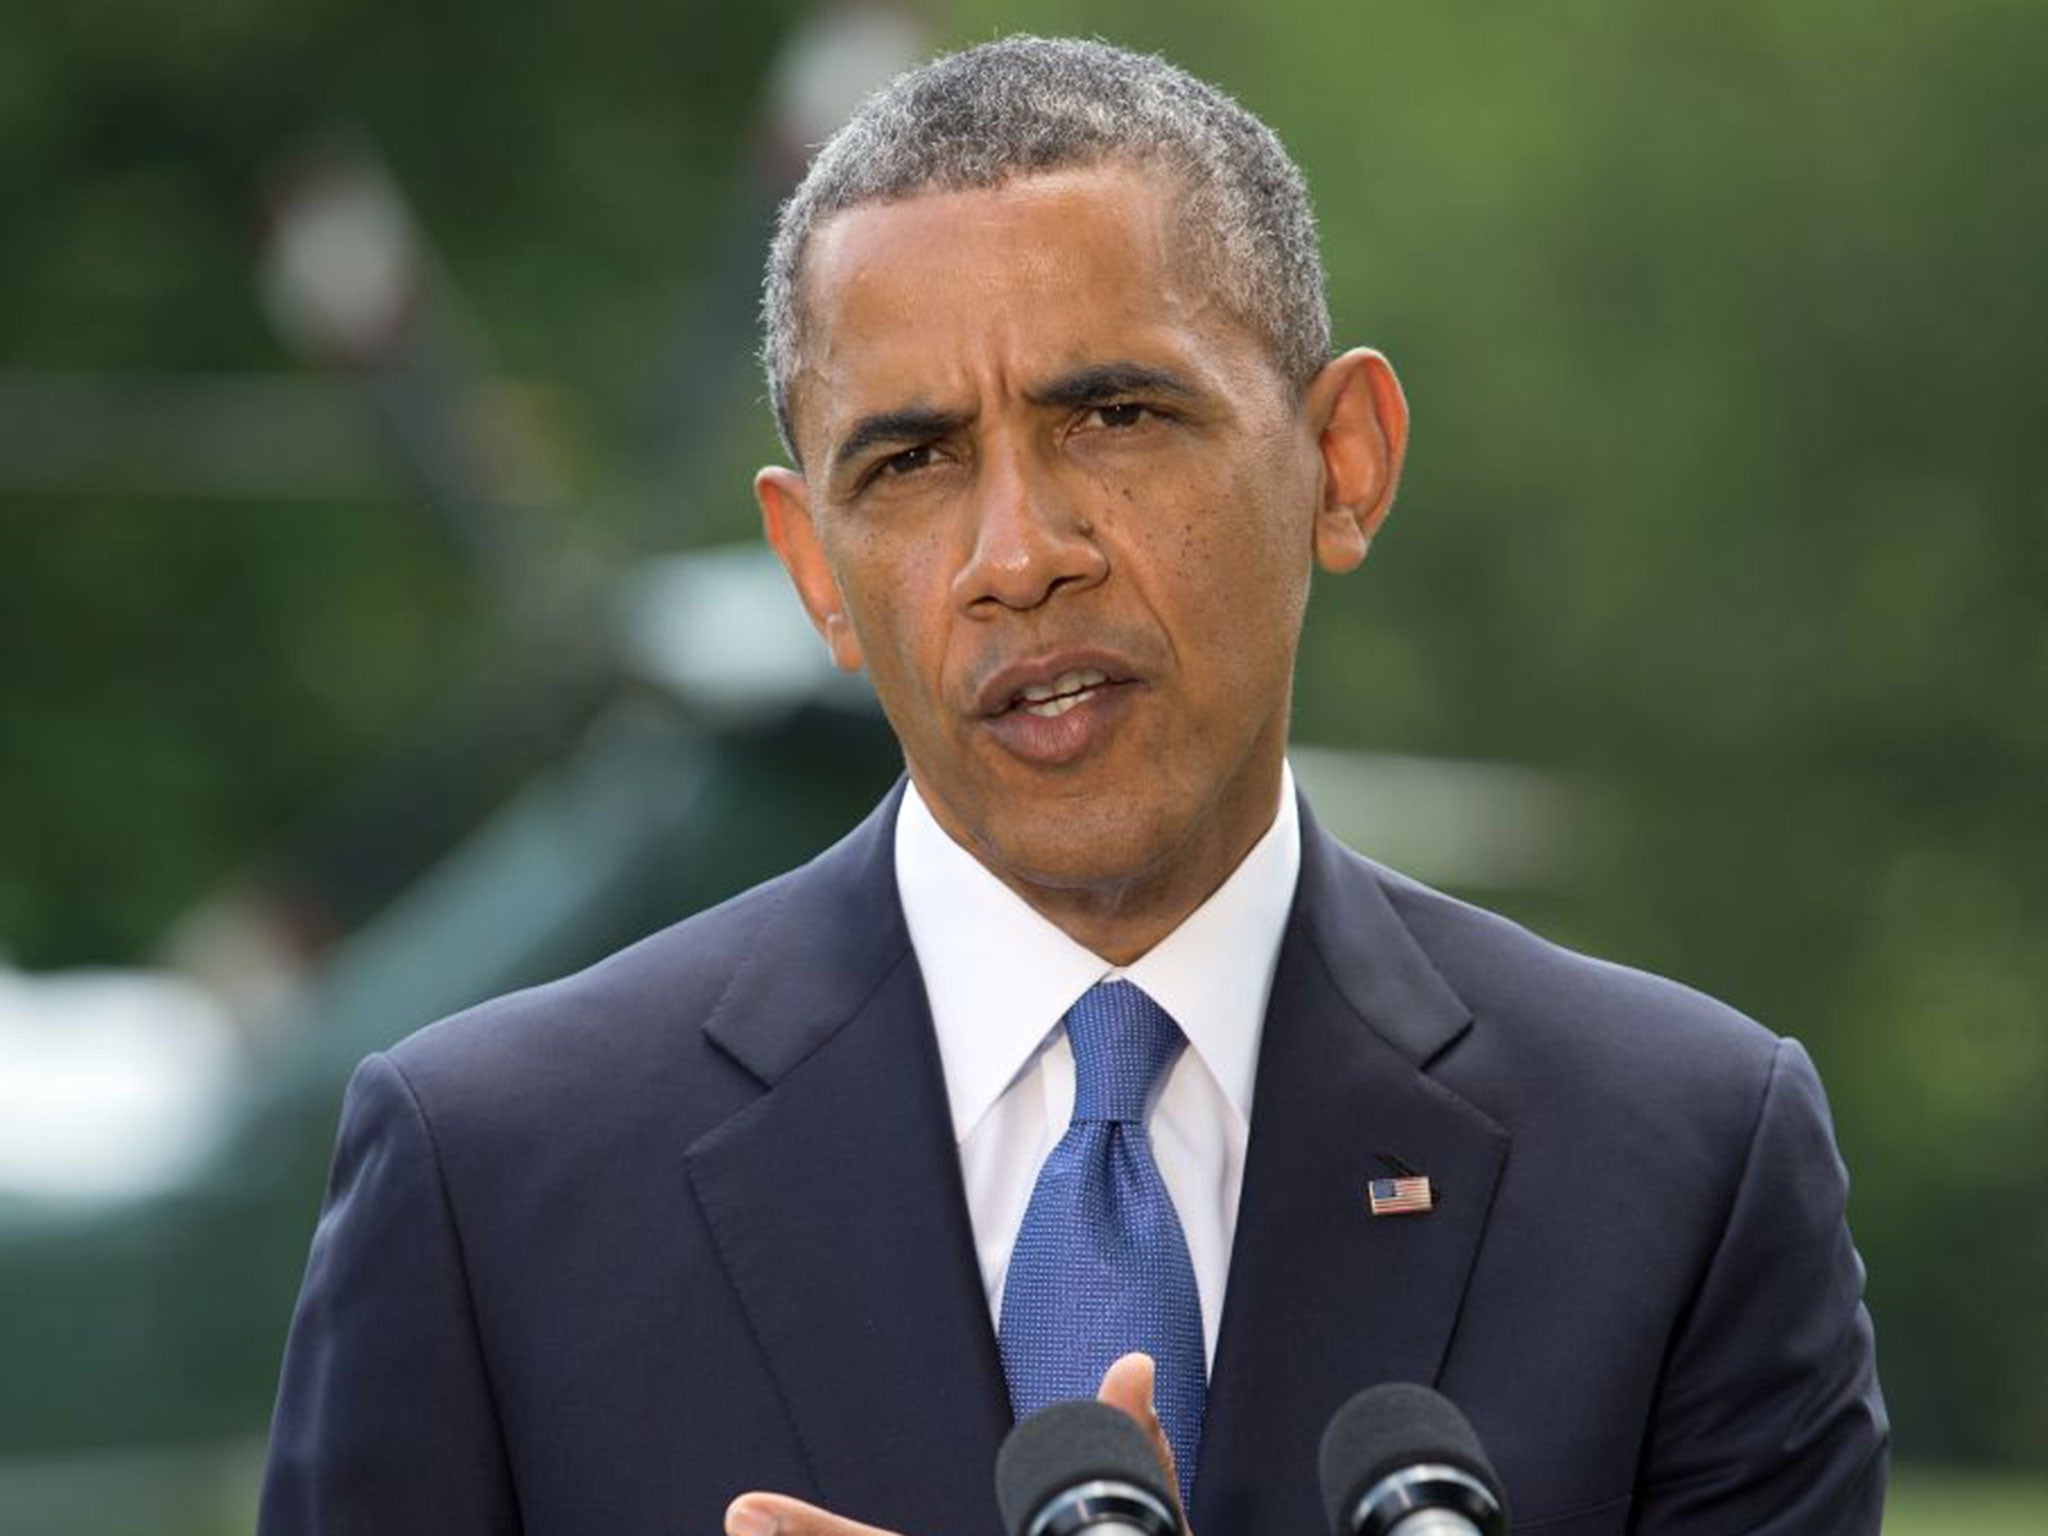 President Obama: On the verge of ordering military action in Iraq